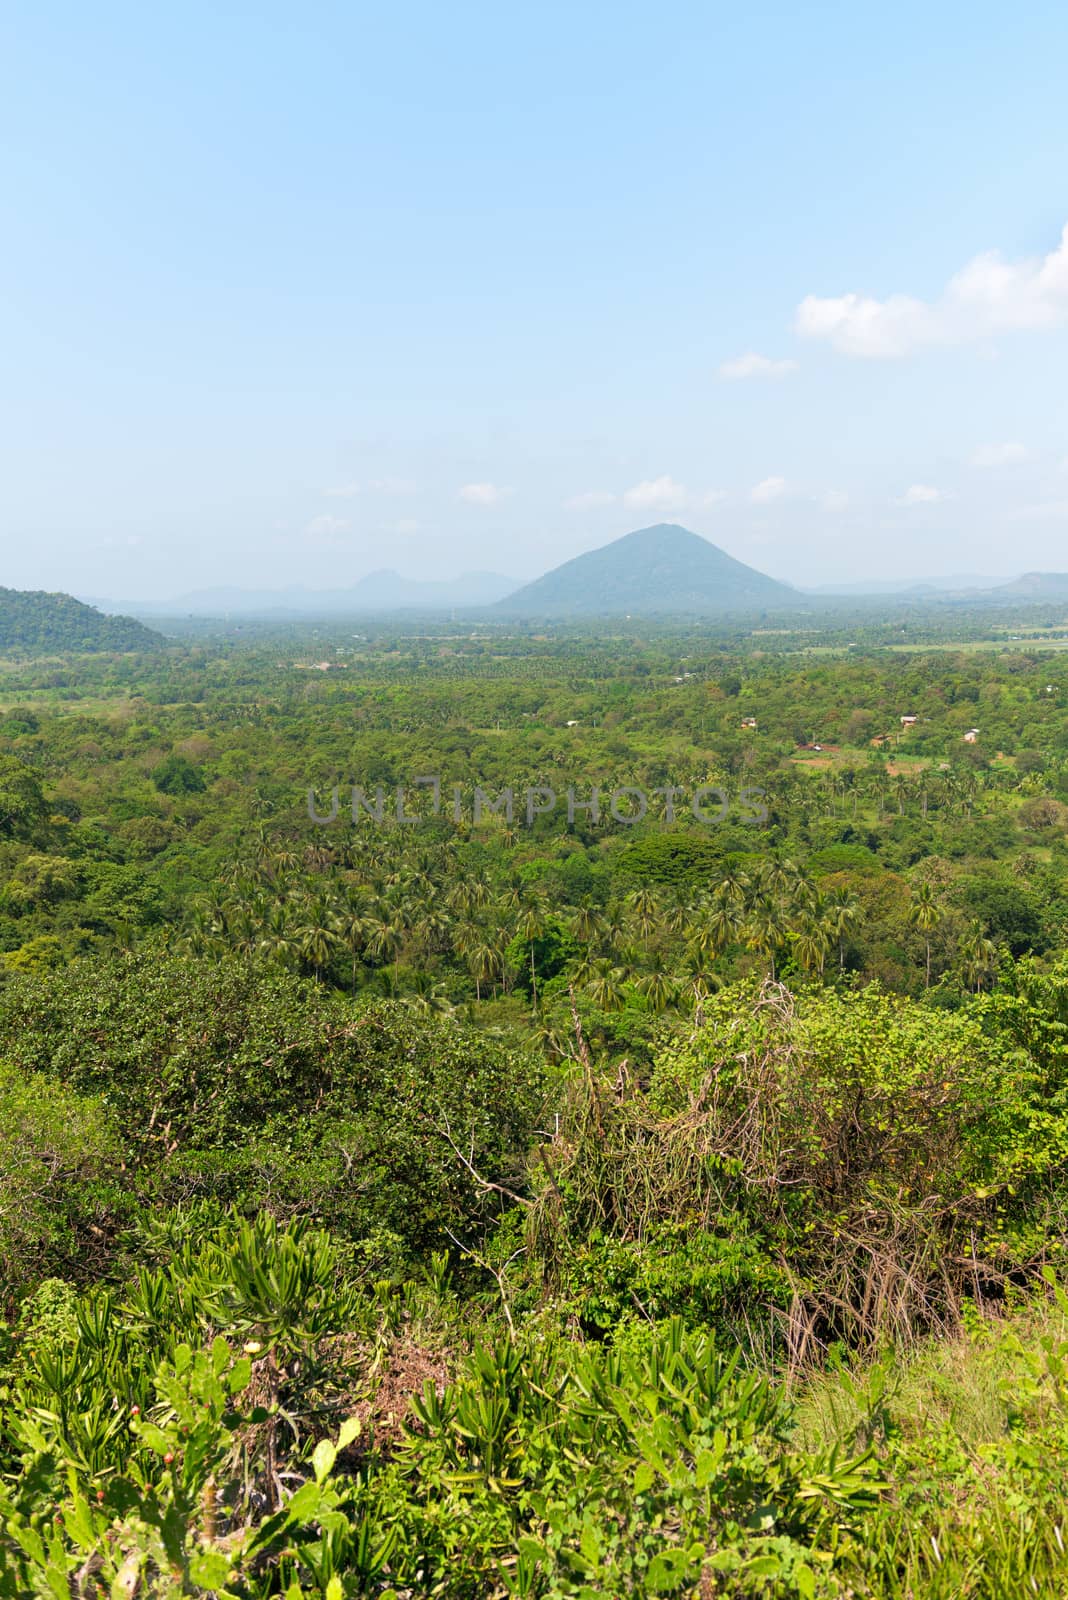 Tropical landscape with hill and mountain under blue sky, Dambulla, Sri Lanka 